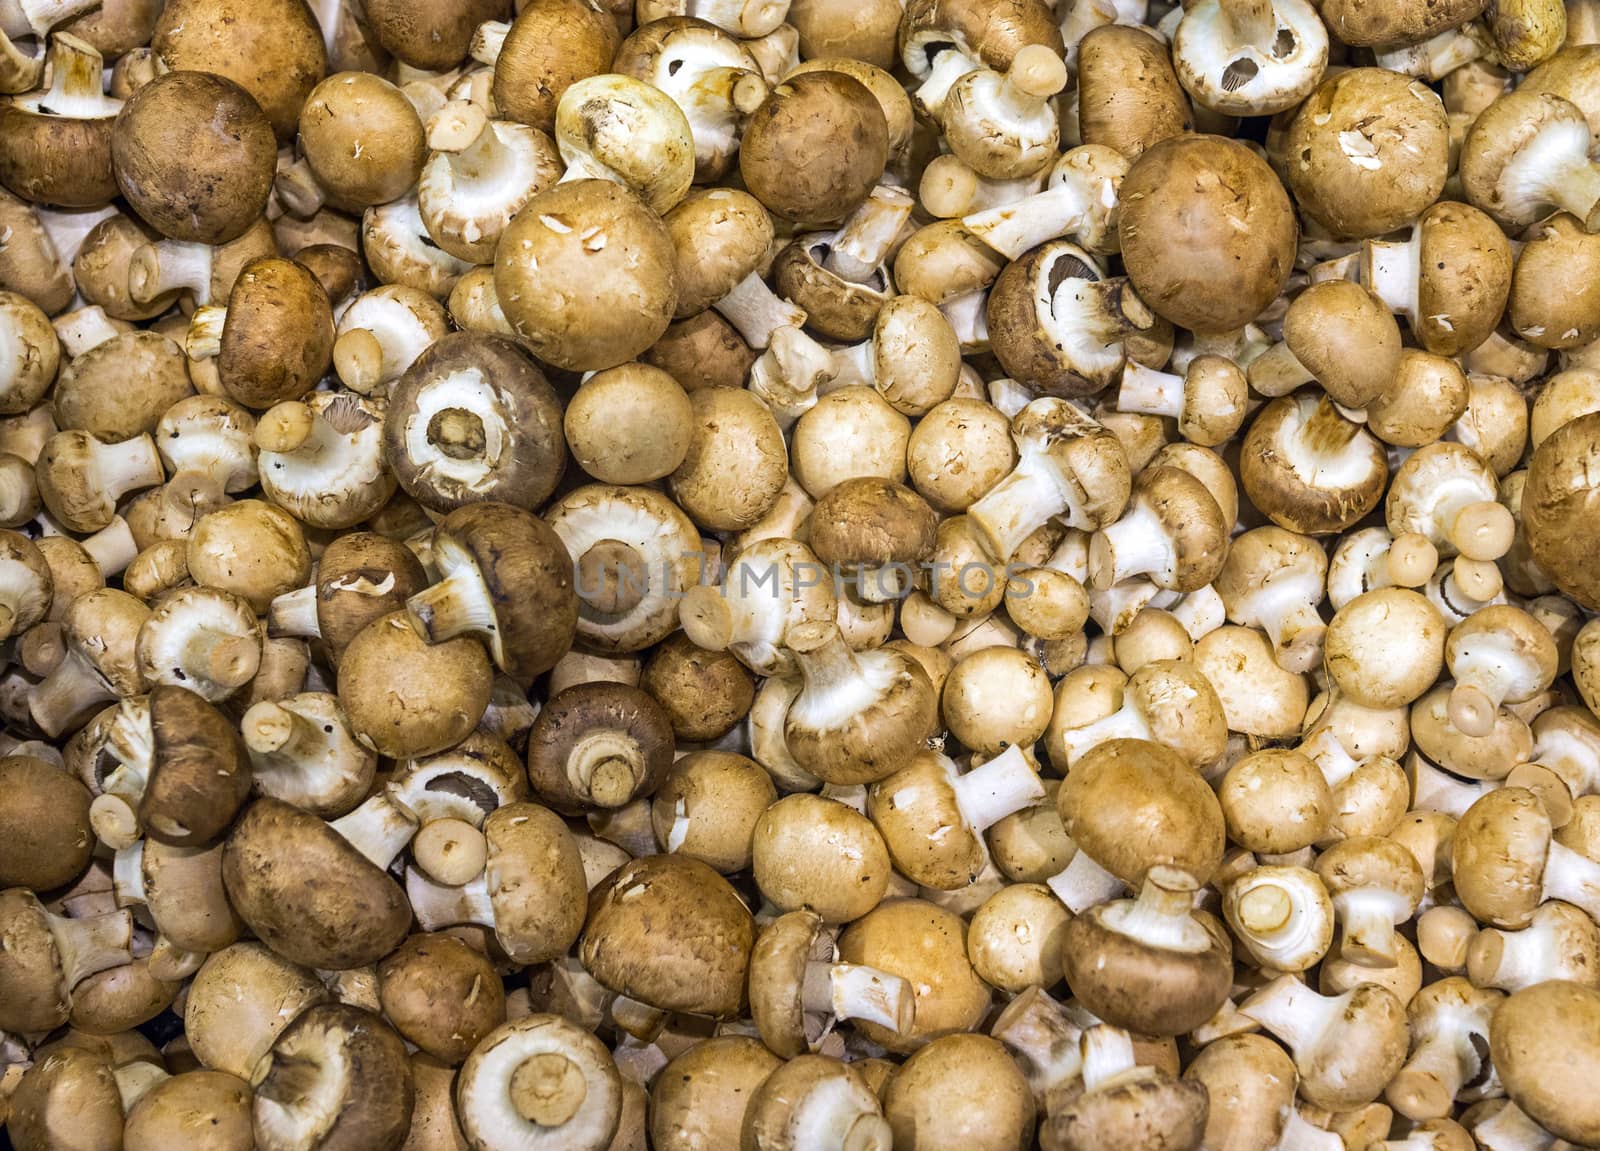 Brown champignons for sale on a market